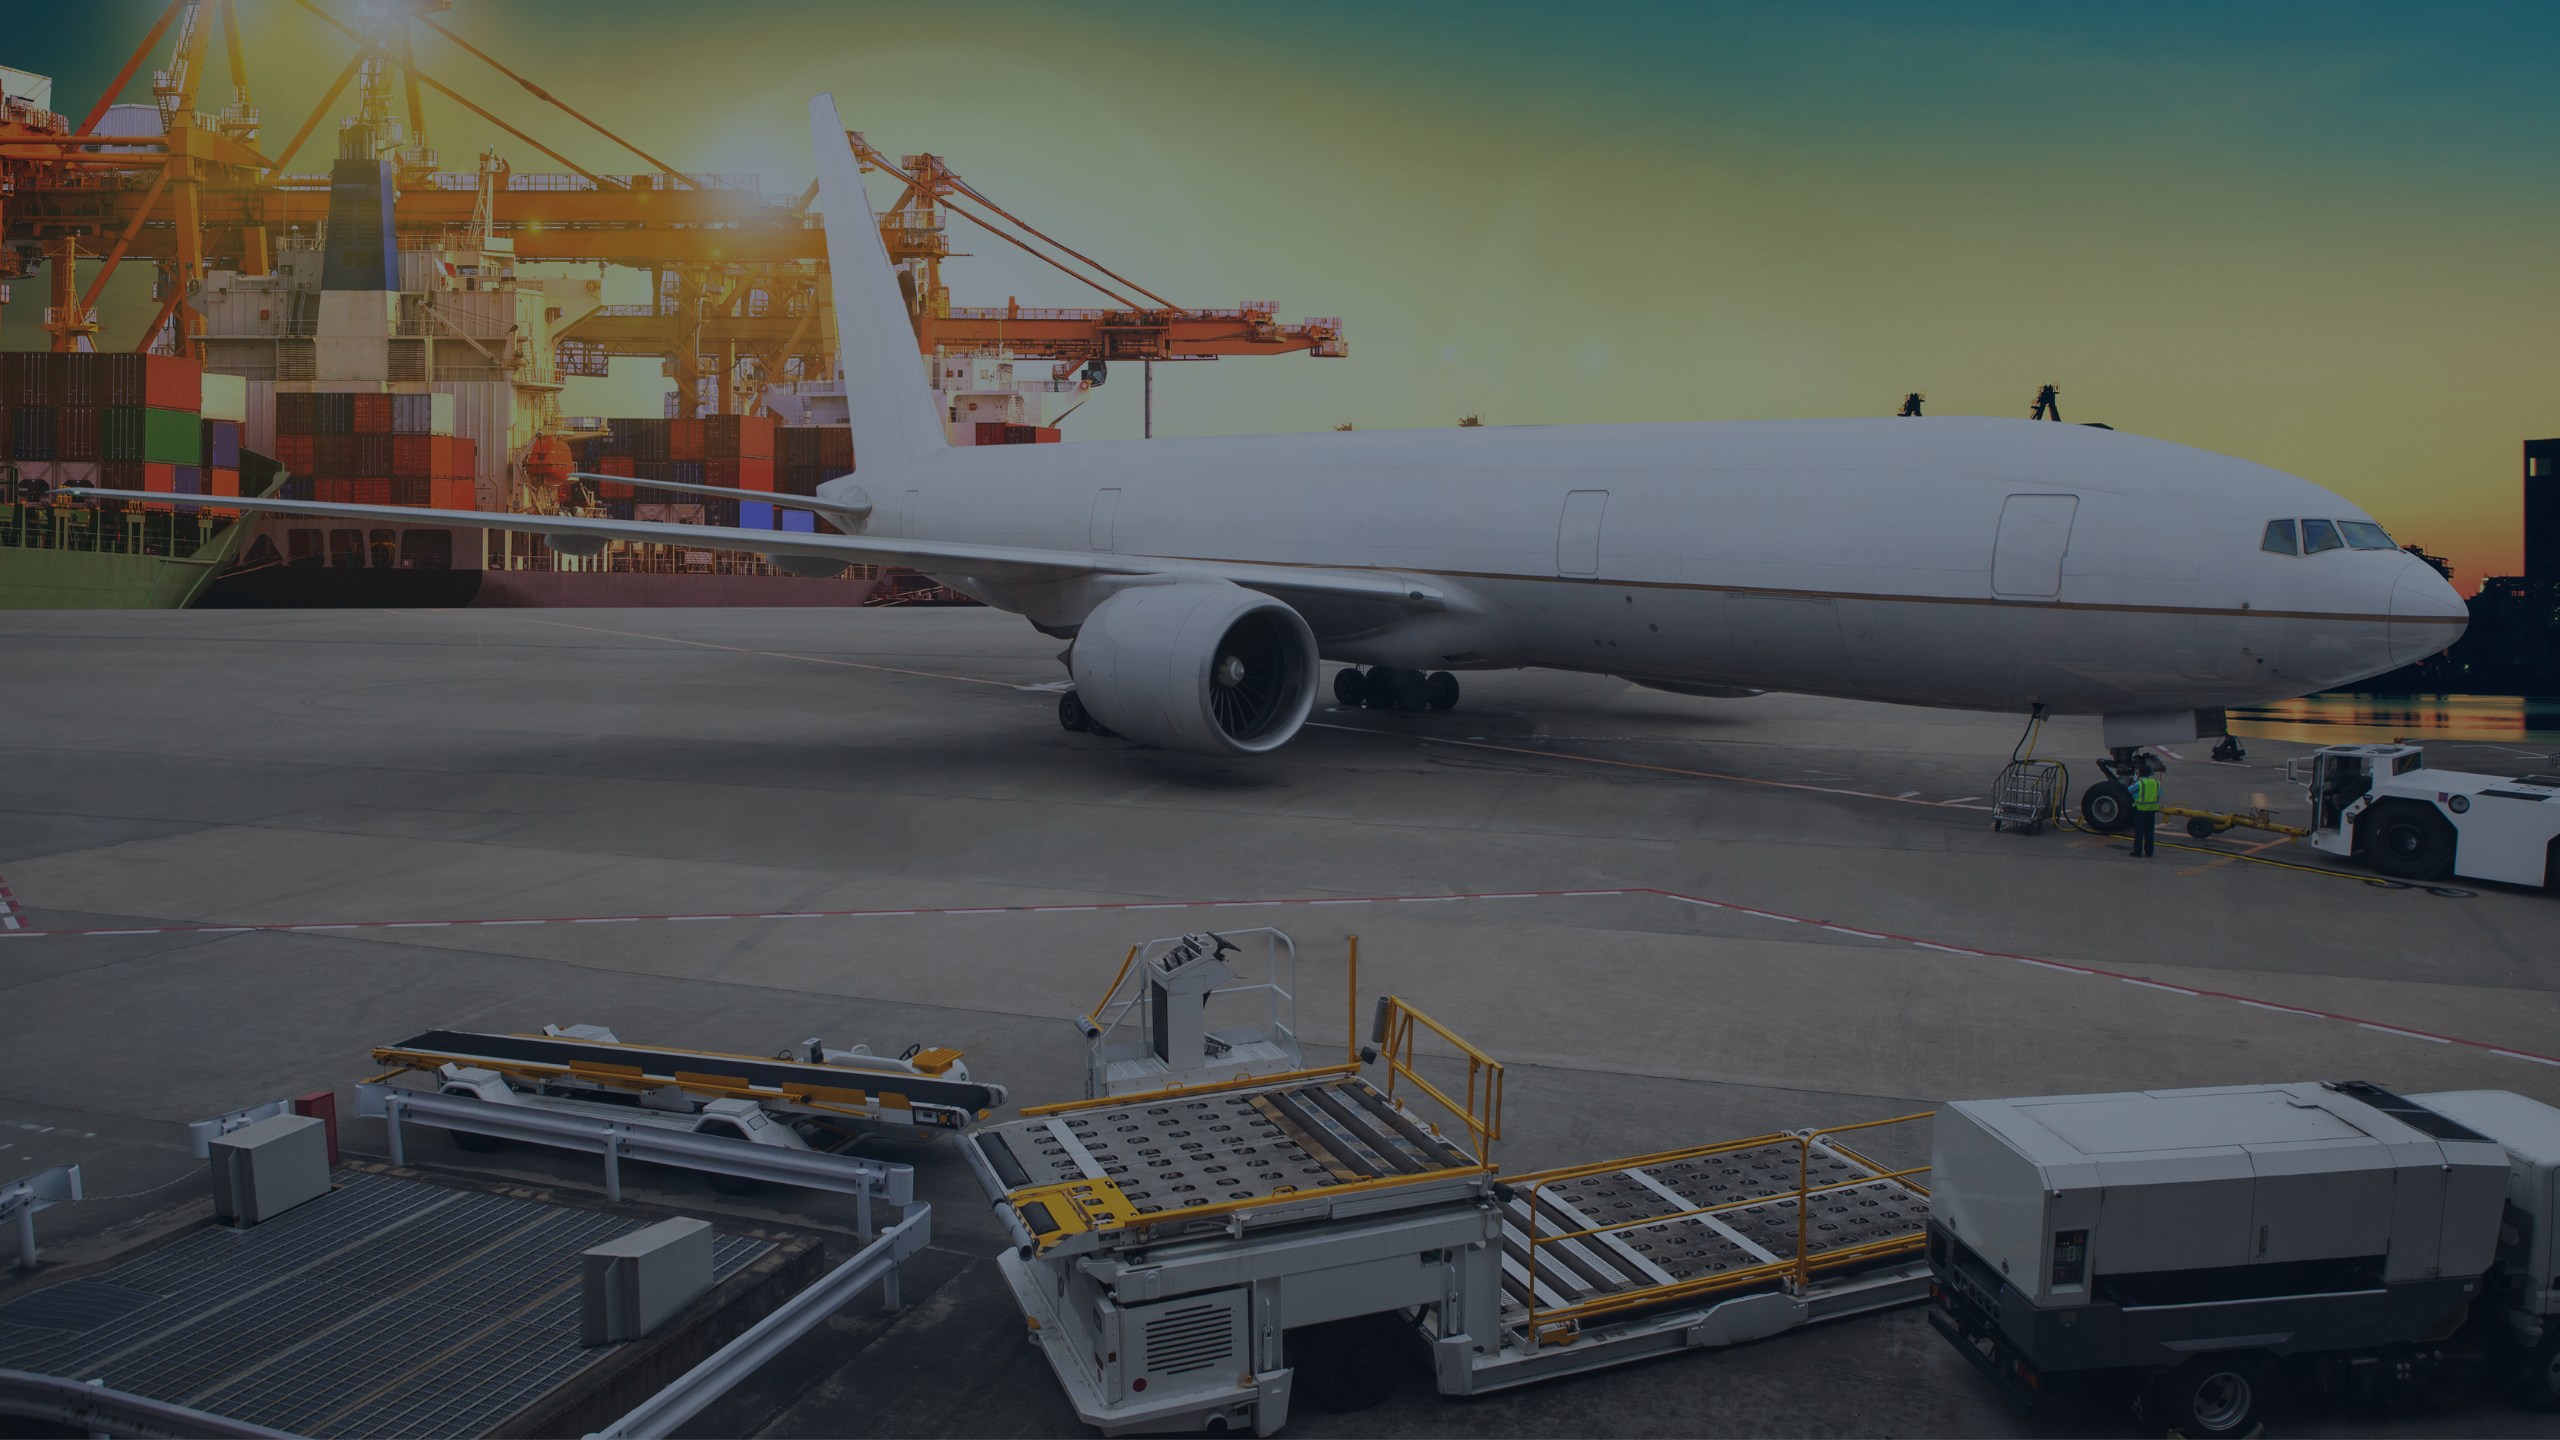 Clinical Trial Supply Chain depiction with an airplane on the runway as well as import containers and equipment in the background.